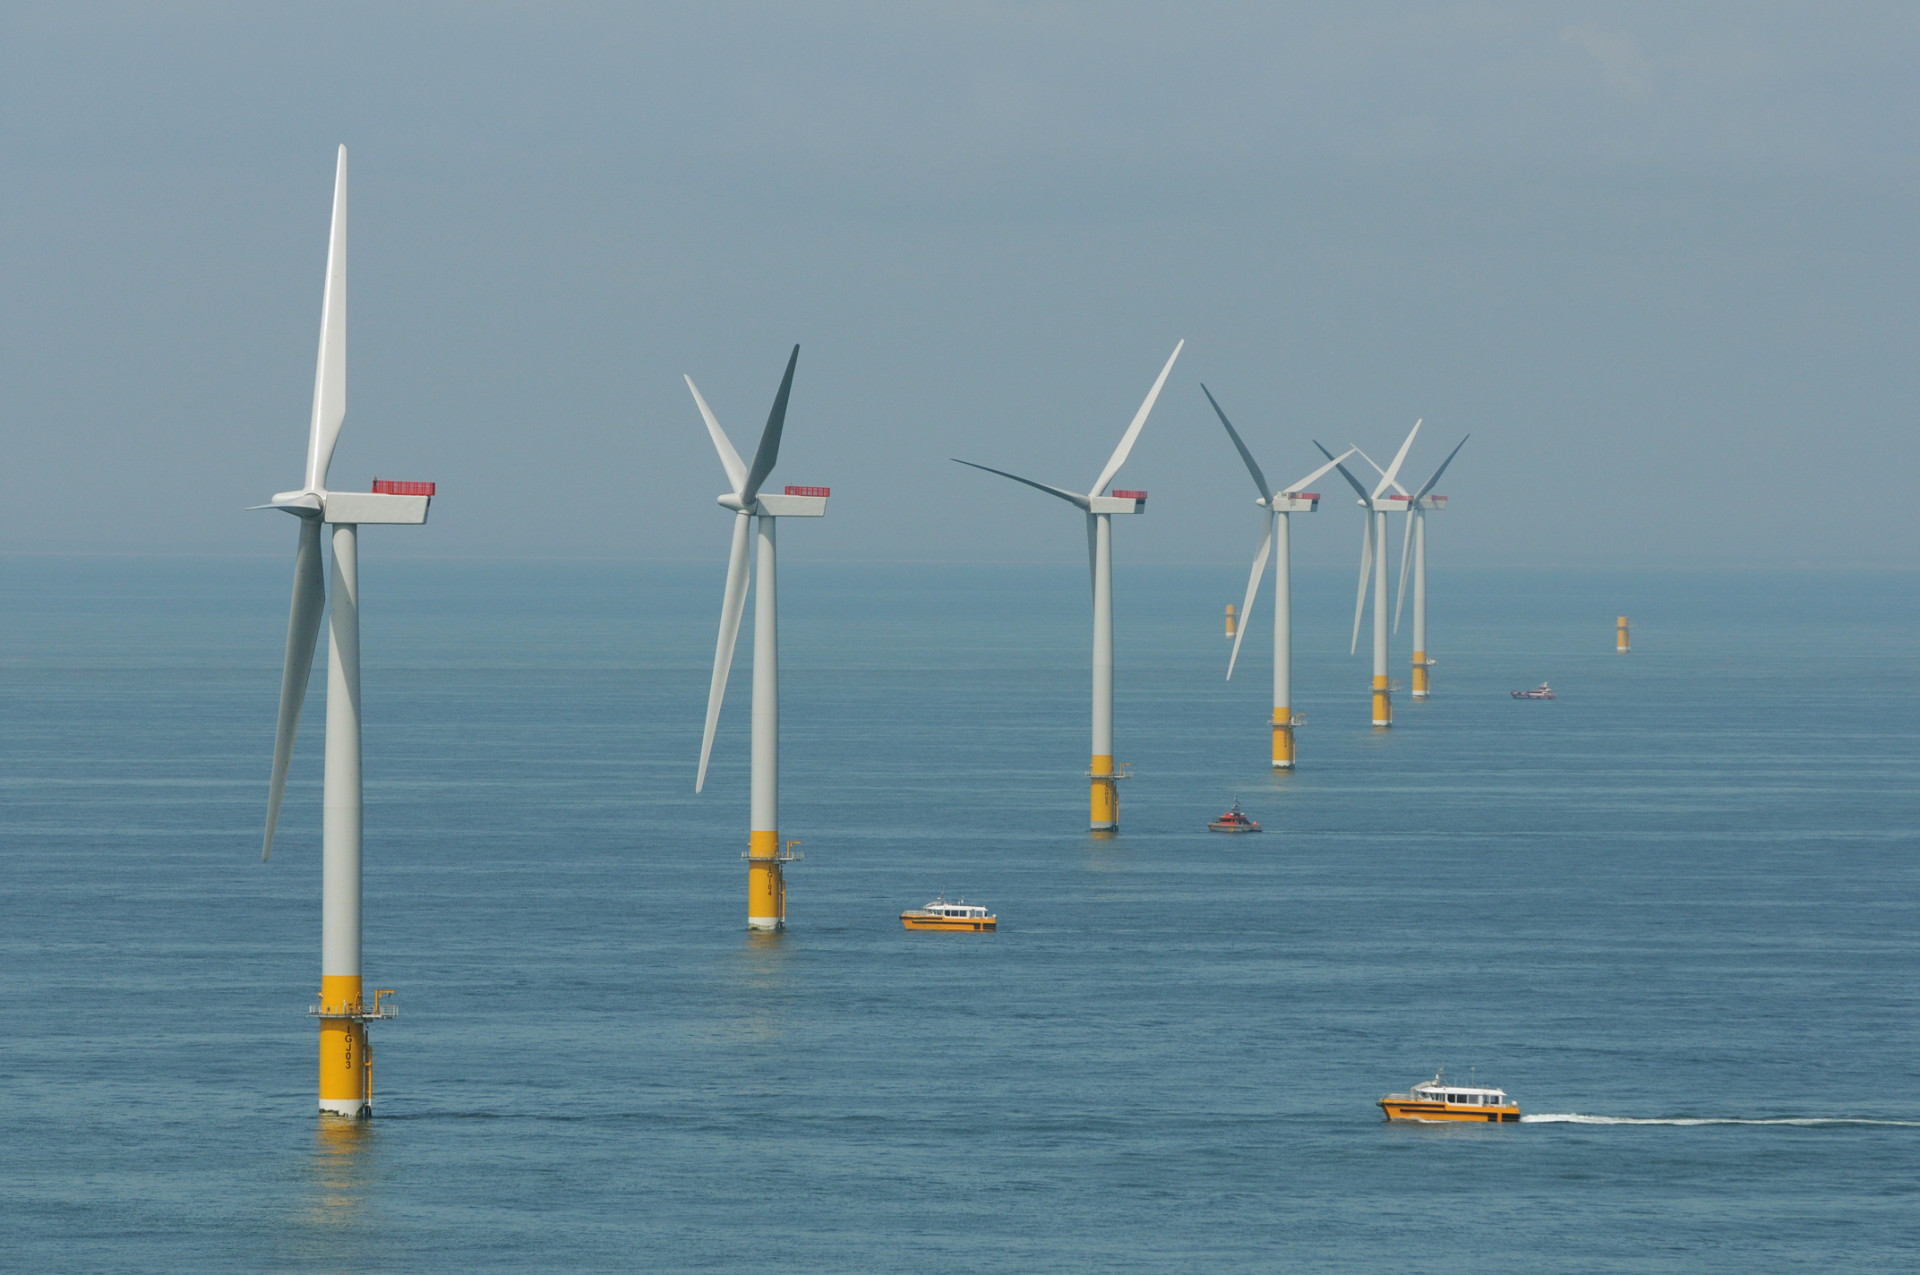 East Anglian Offshore Wind Supply Chain Eyeing US Market